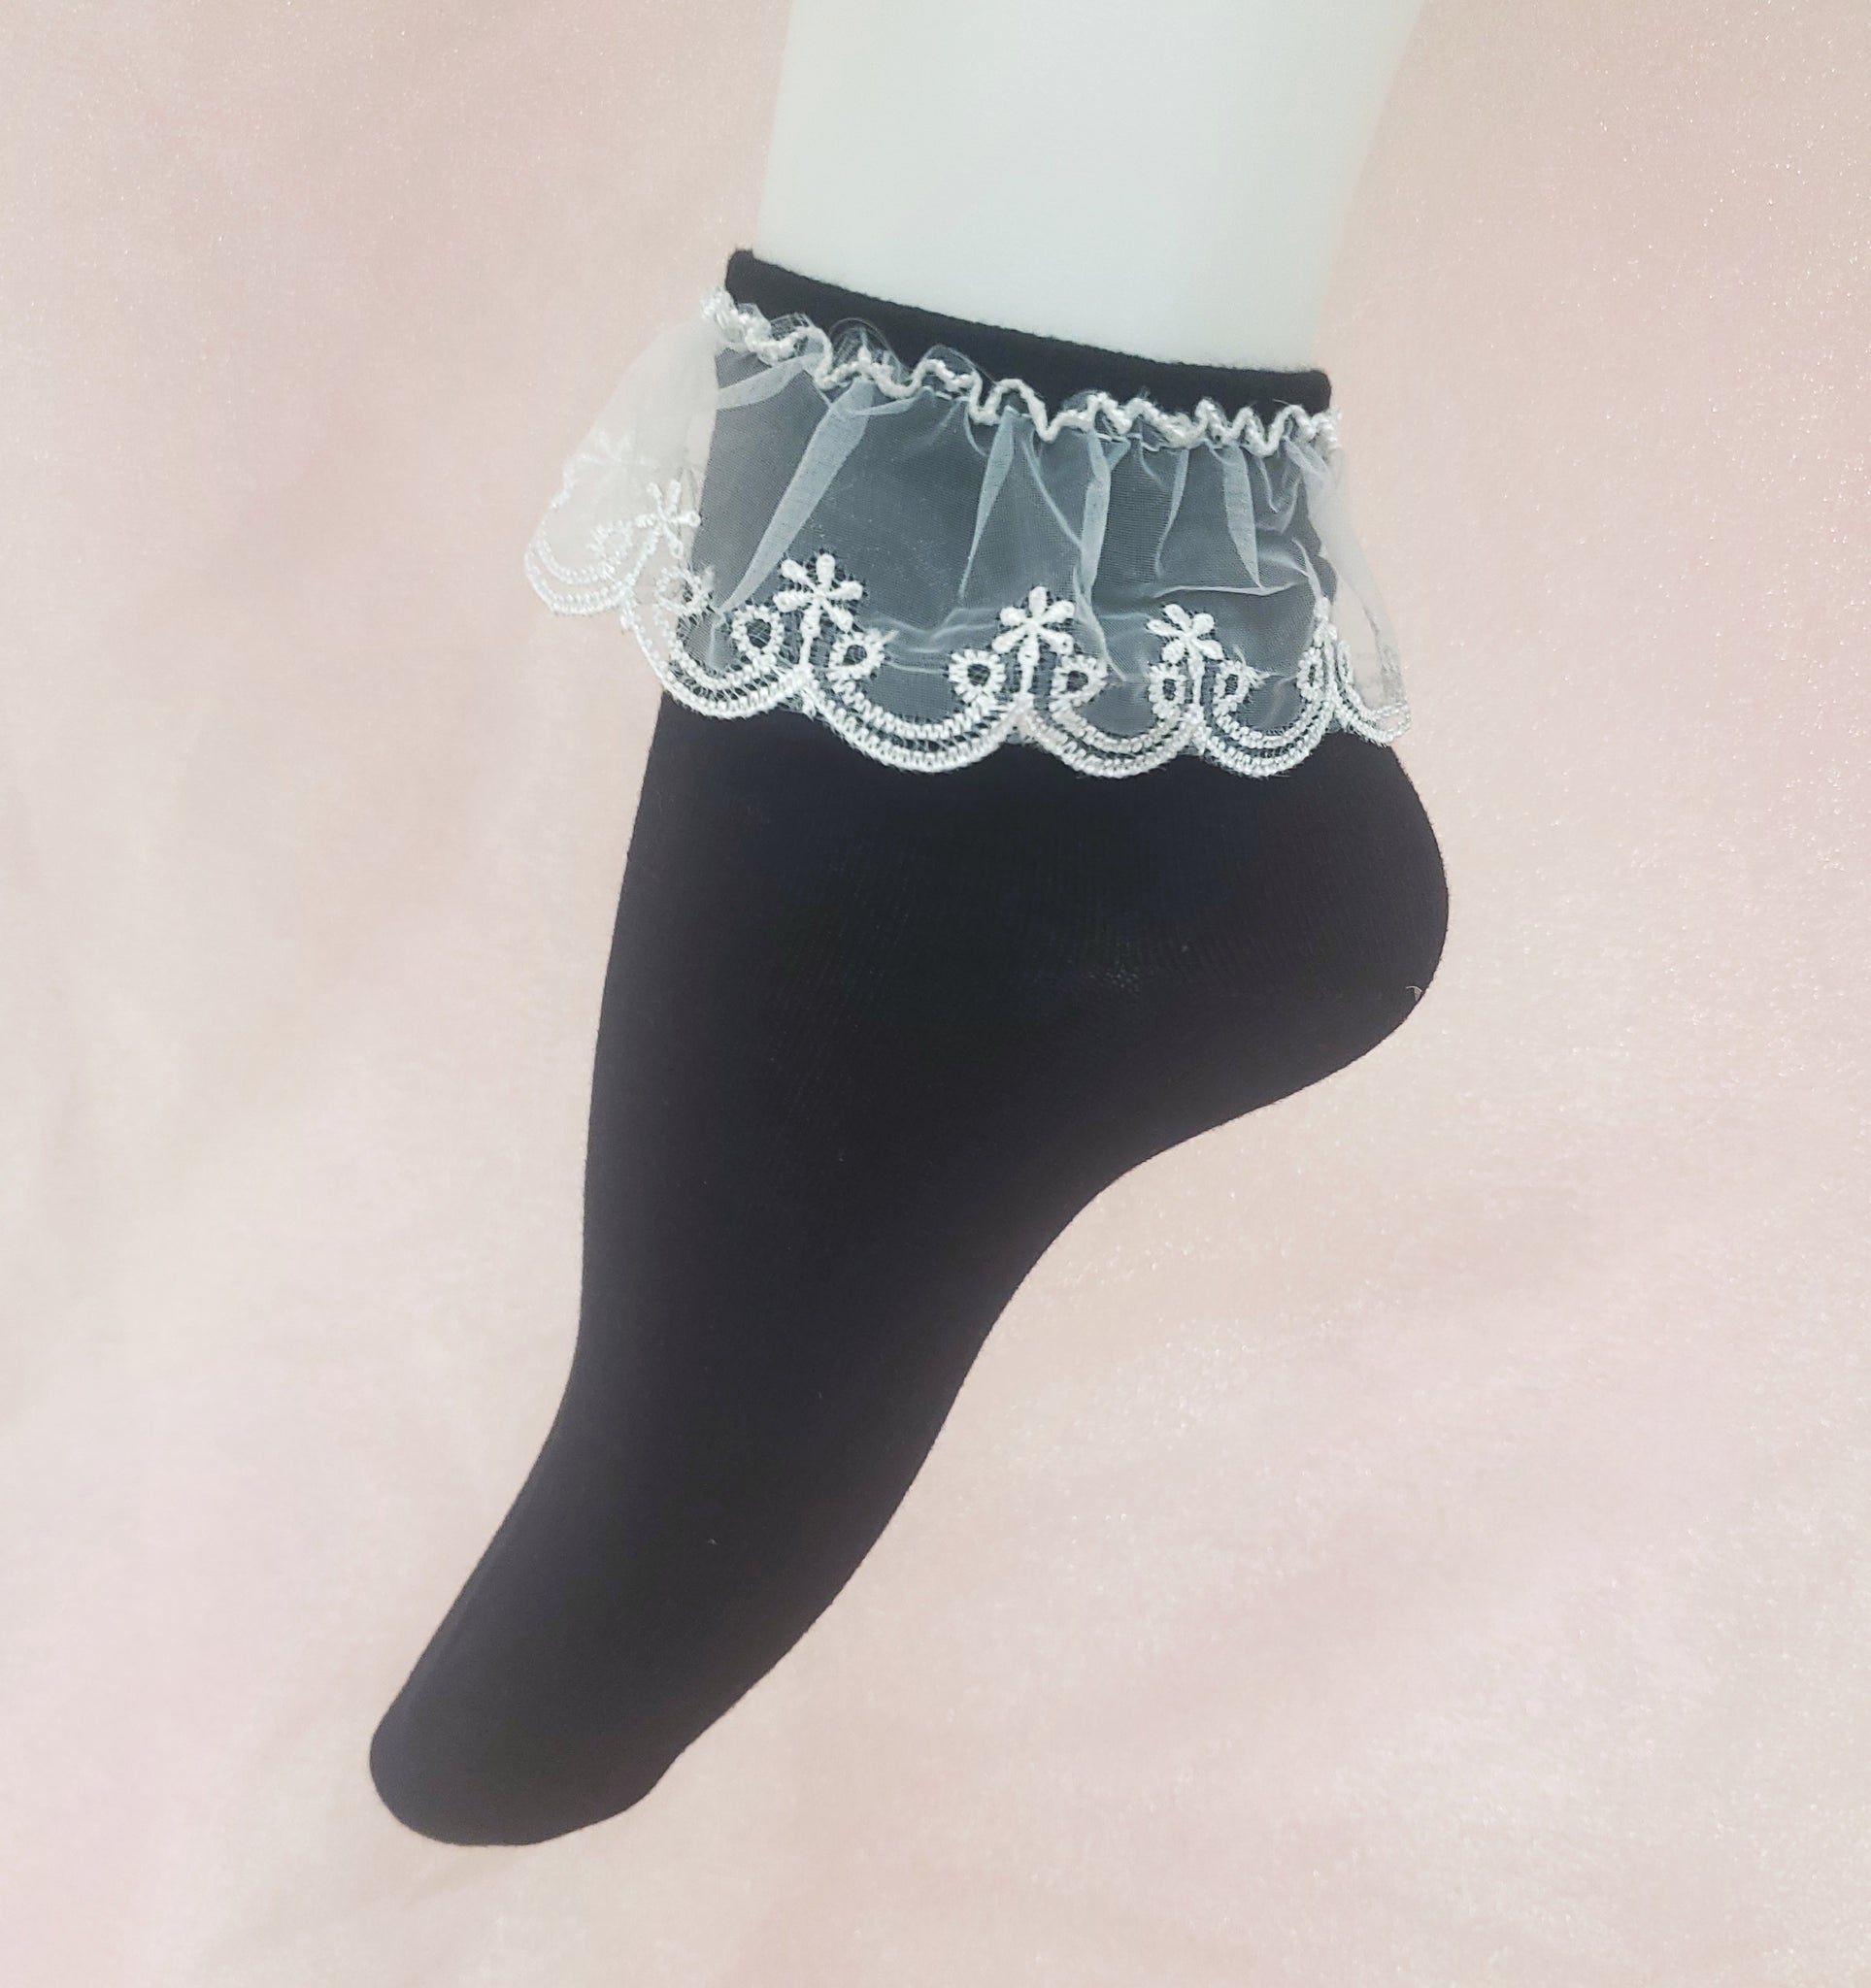 Instant Shipping! Flower Lace Ankle Socks